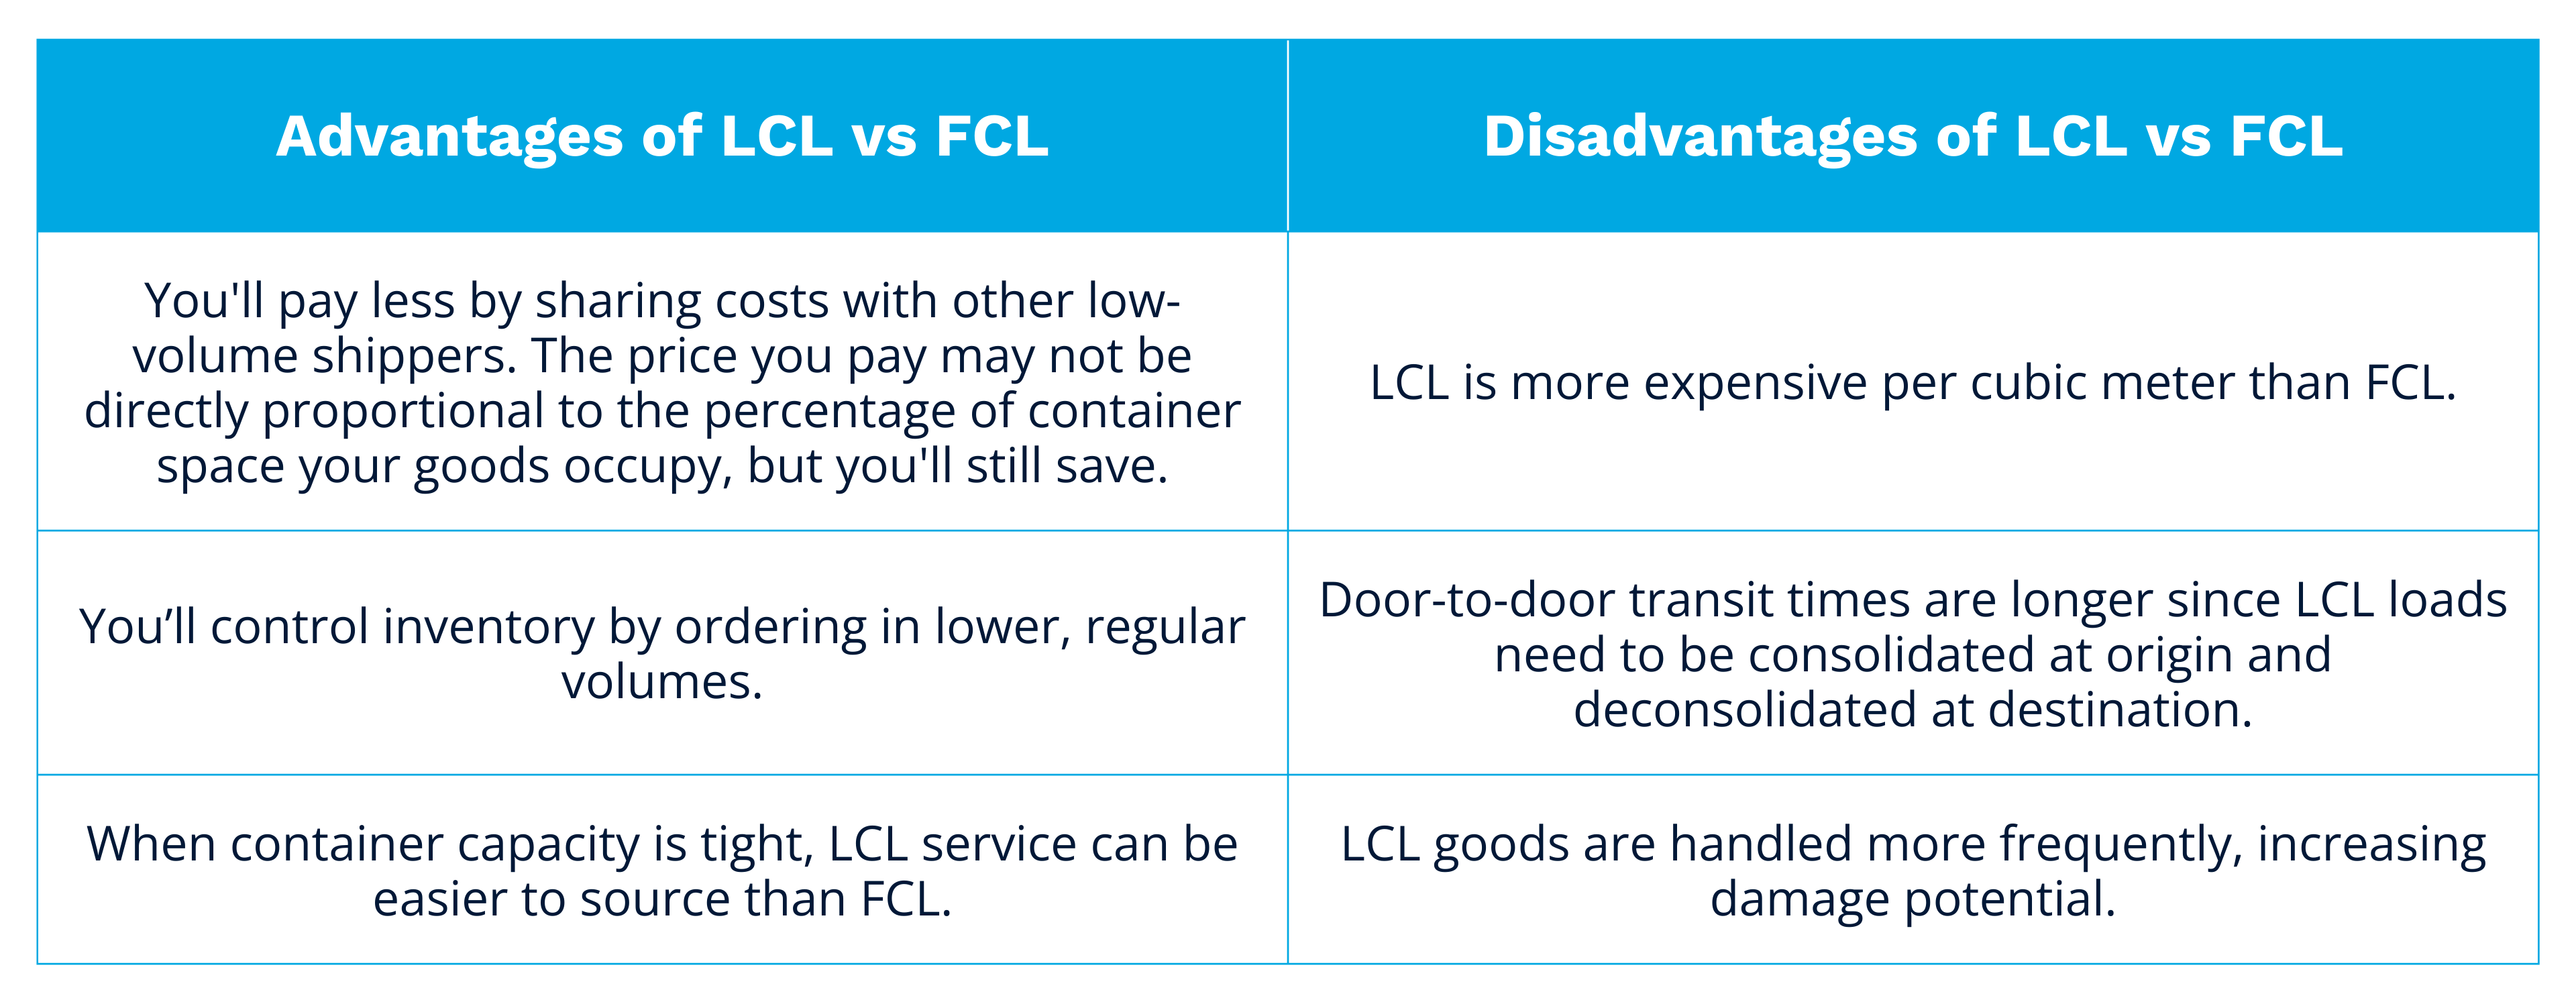 Advantages-LCL-shipping